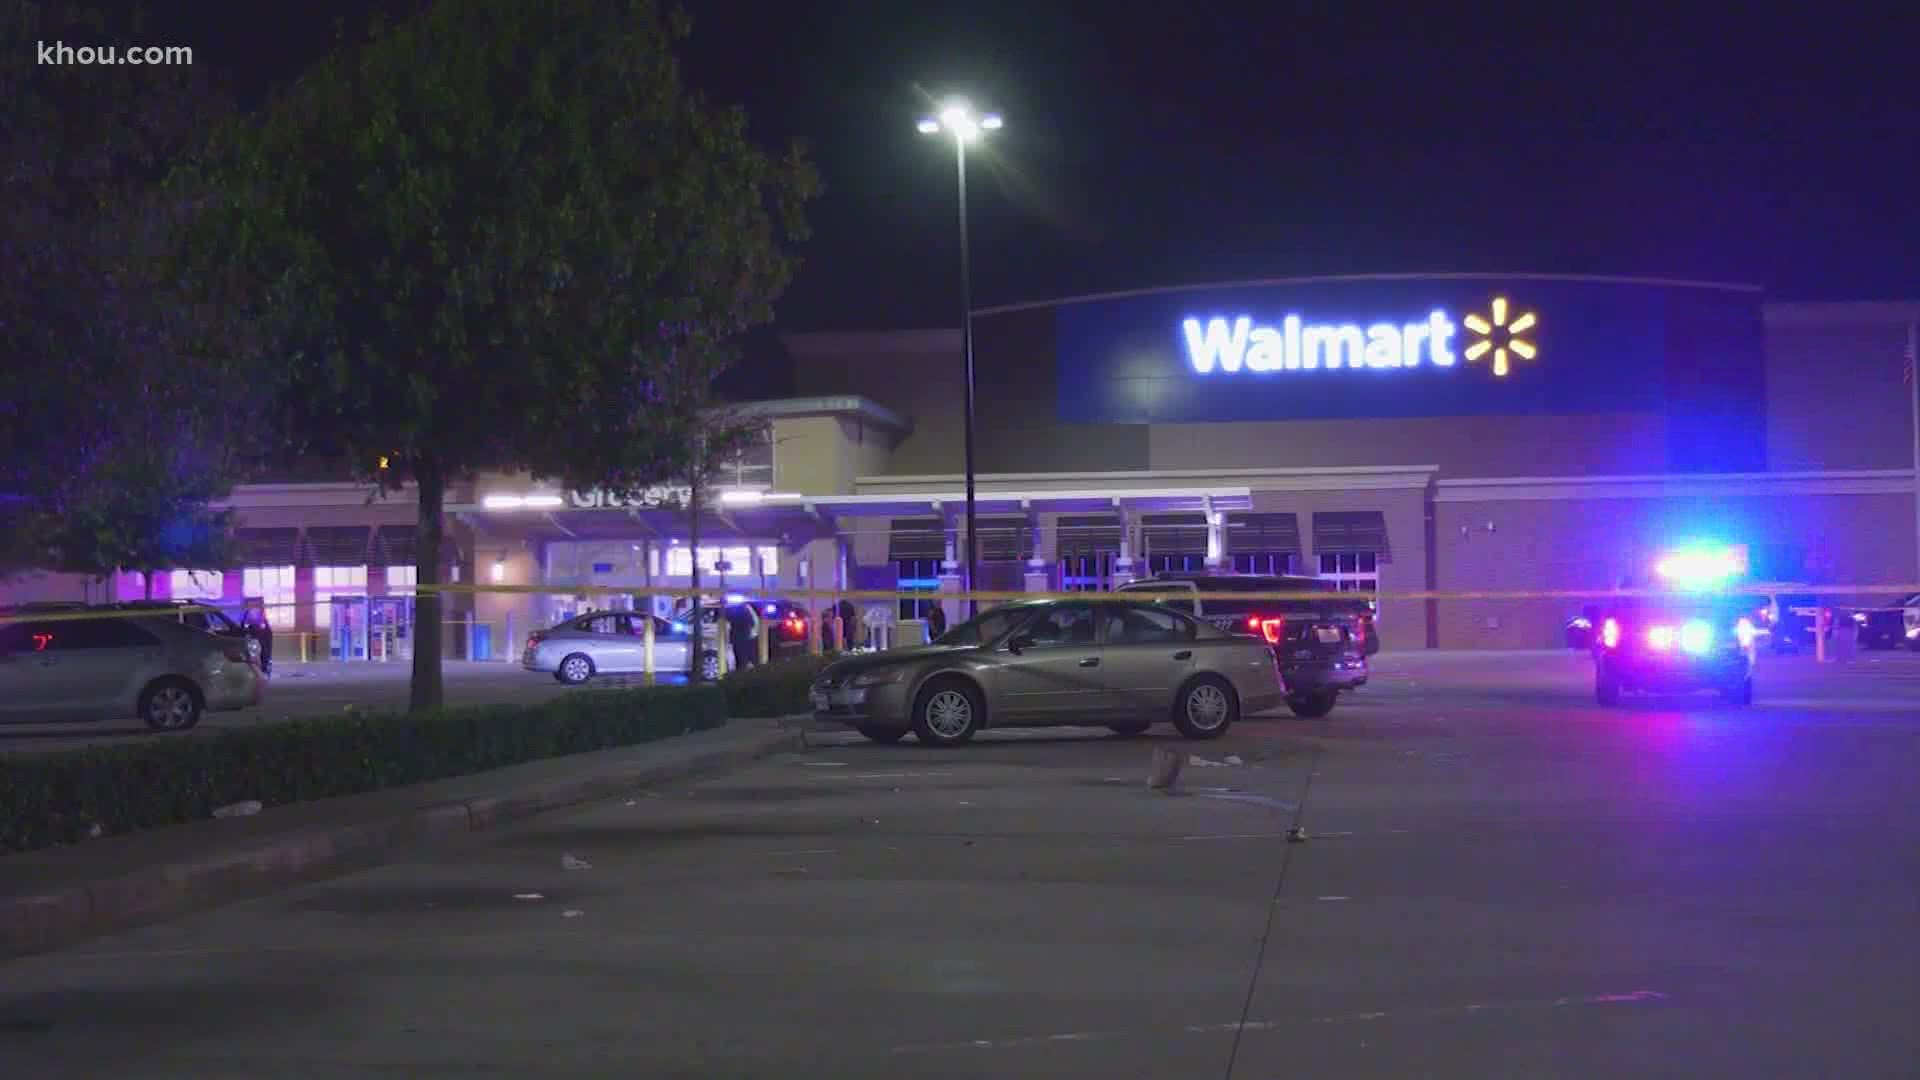 An alleged shoplifting suspect was shot Oct. 31 by a HPD officer at a Walmart near the Heights. Police said the suspect attacked the officer before the shooting.